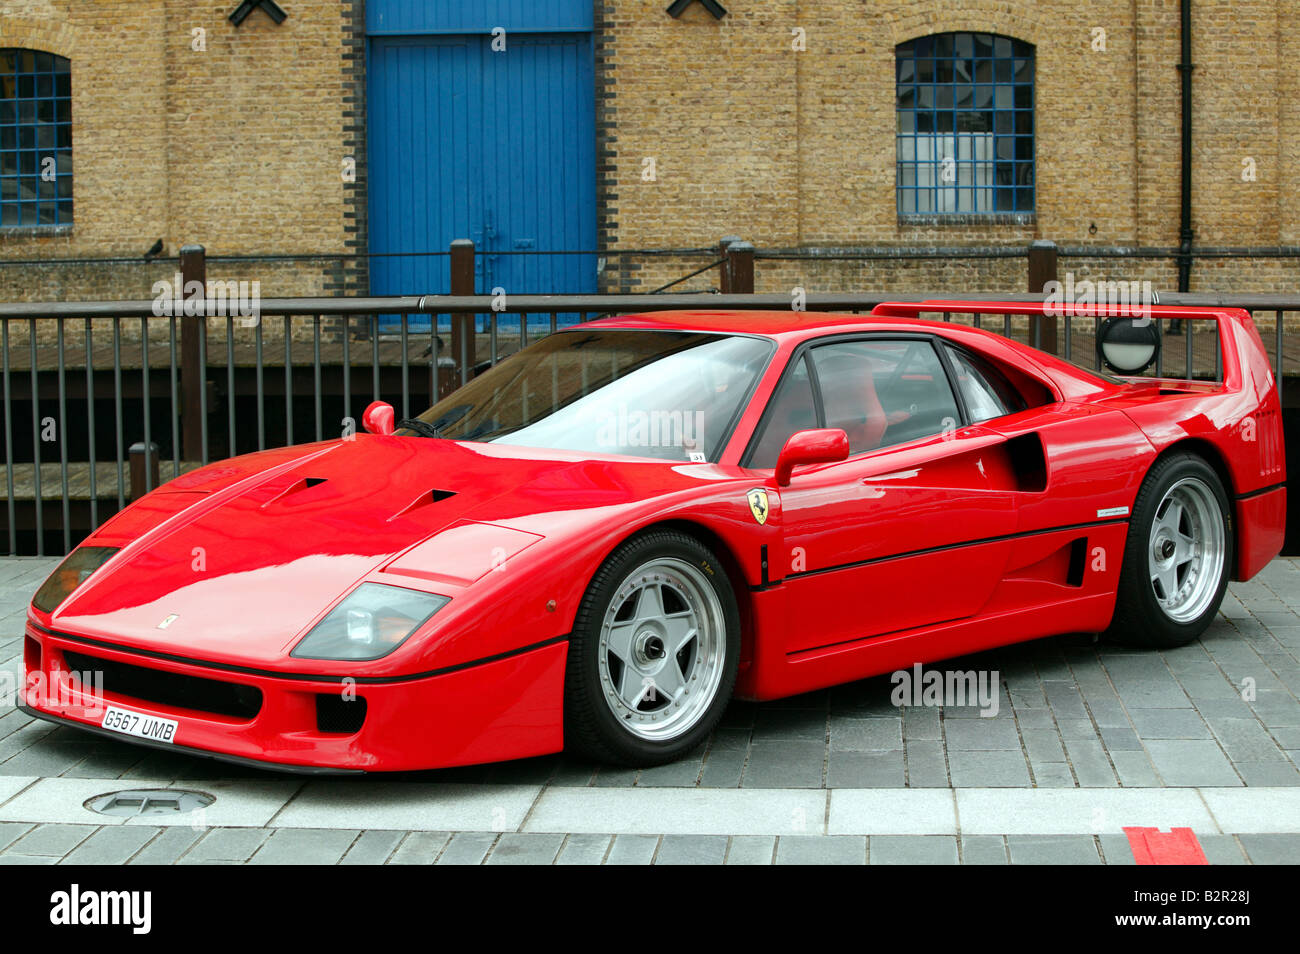 Three-Quarter Front view of a Ferrari F40 on display at the London Motor Show Stock Photo